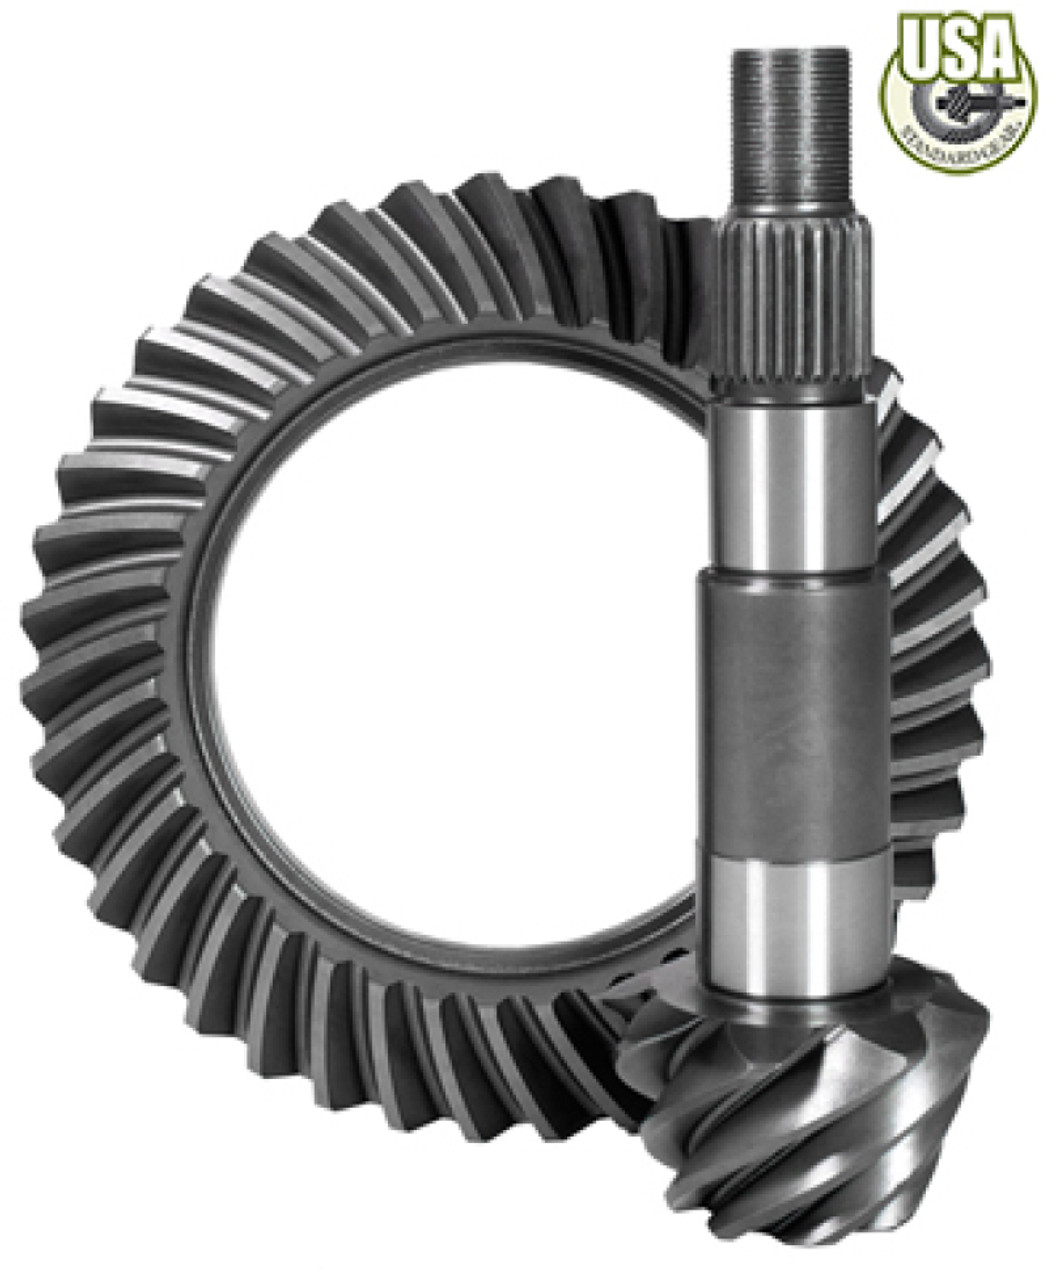 Yukon Gear ＆ Axle (YG F8.8-331) High Performance Ring And Pinion Gear Set  For Differential, Ford 8.8 In 3.31 Ratio クラッチ、駆動系